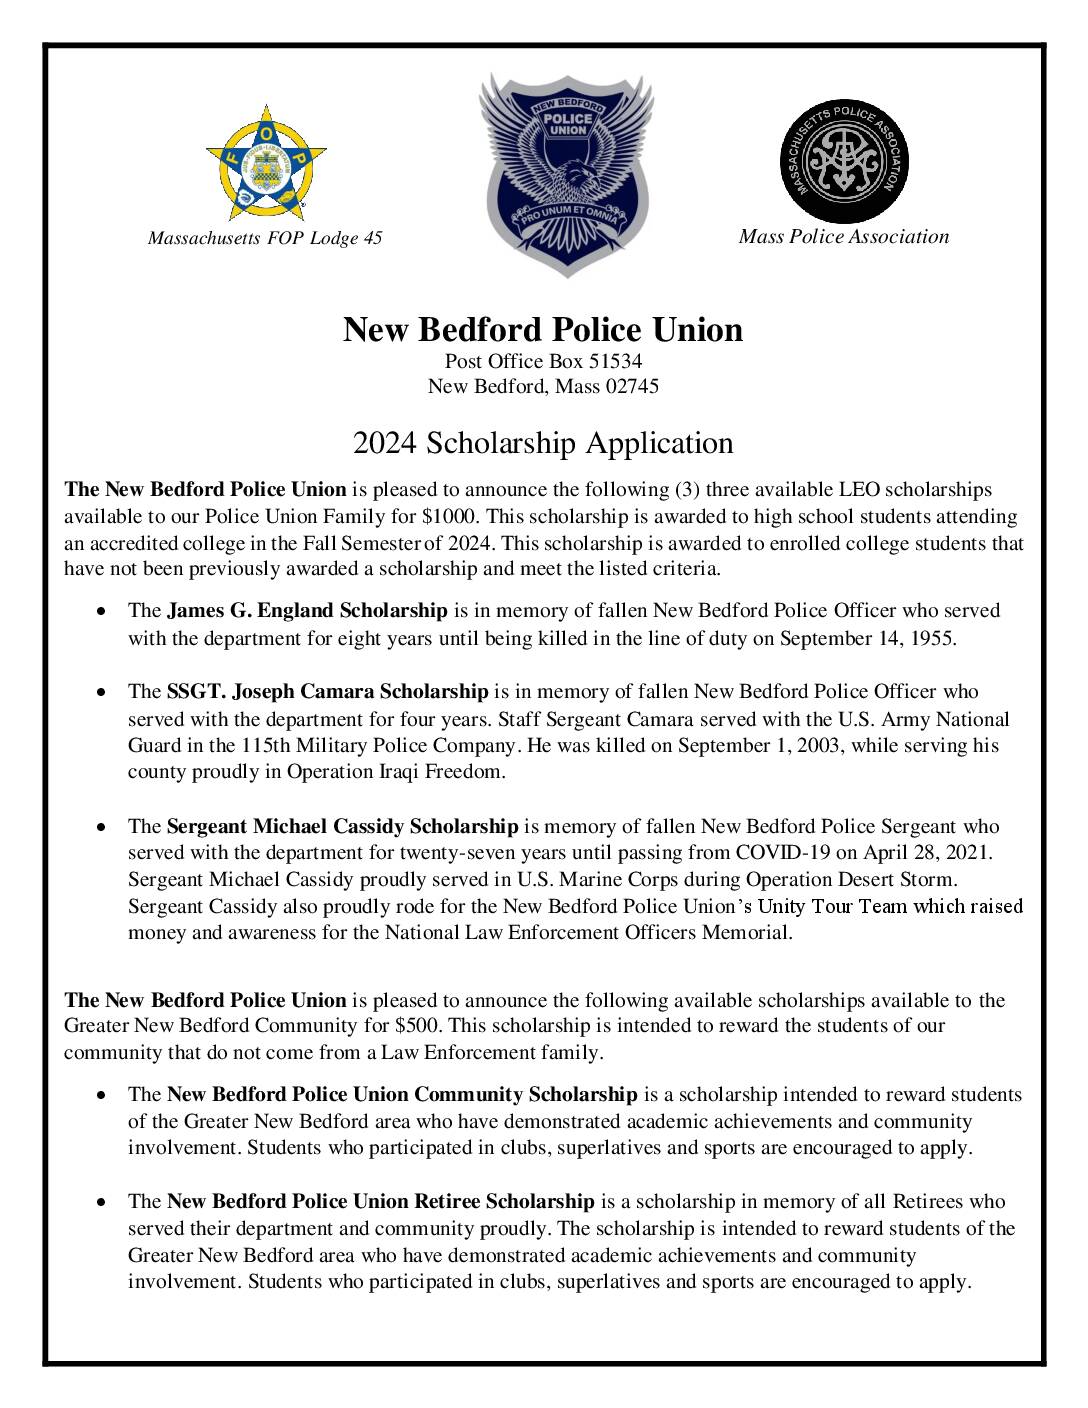 2024 New Bedford Police Union Scholarship